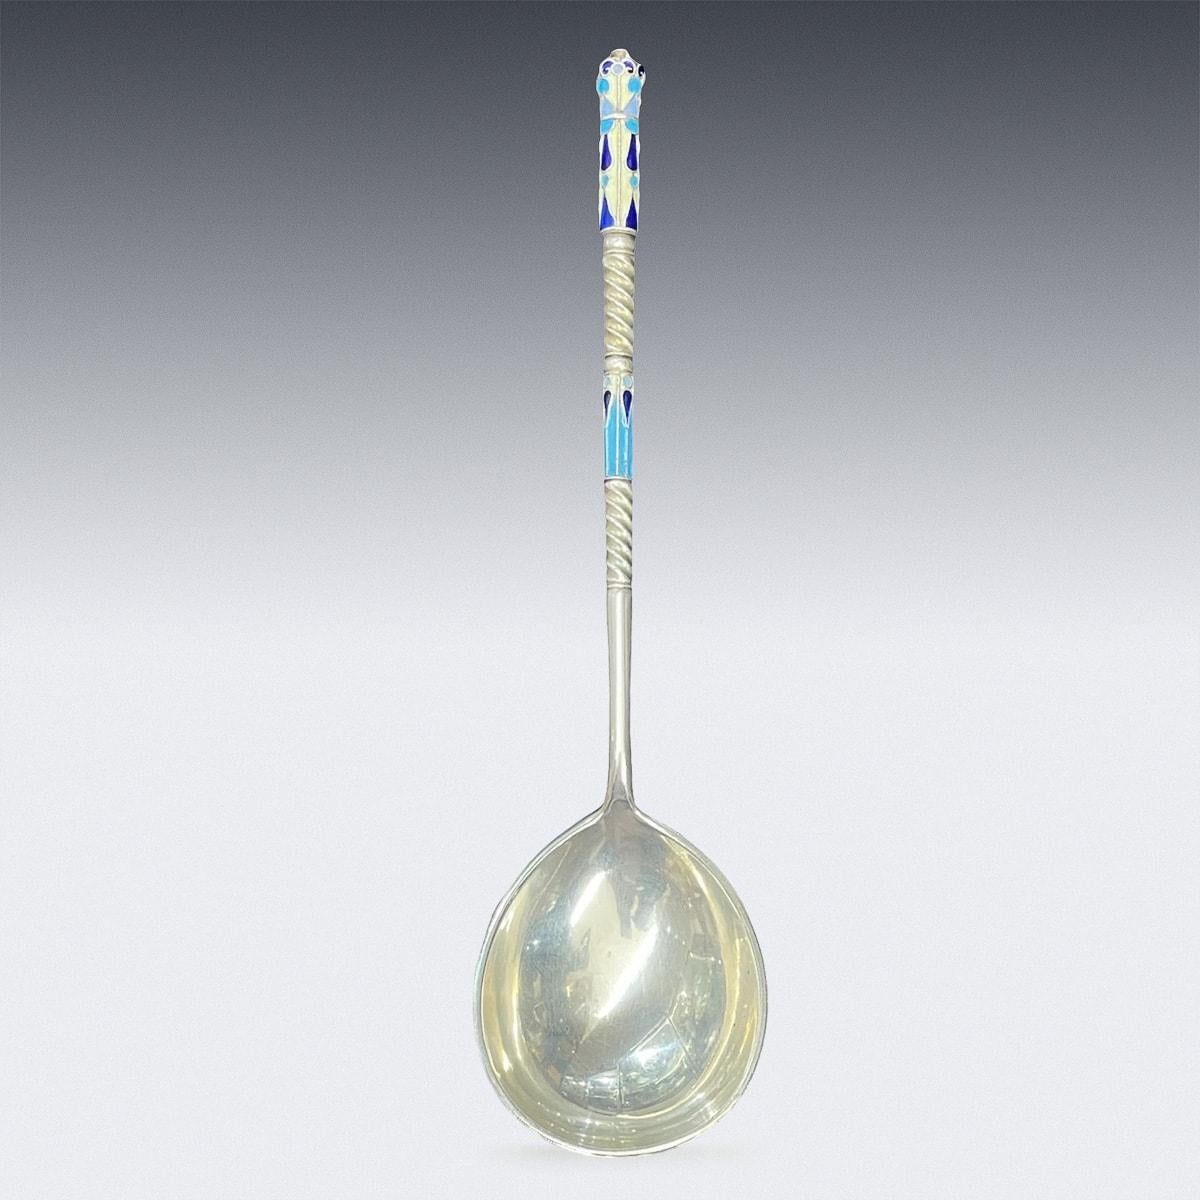 Antique early 20th Century Imperial Russian solid silver and shaded cloisonne' enamel spoon, the round bowl is applied on reverse with doubled headed painted enamel eagle. Hallmarked Russian silver 84 (875 standard), Moscow, Makers Mark in Cyrilic